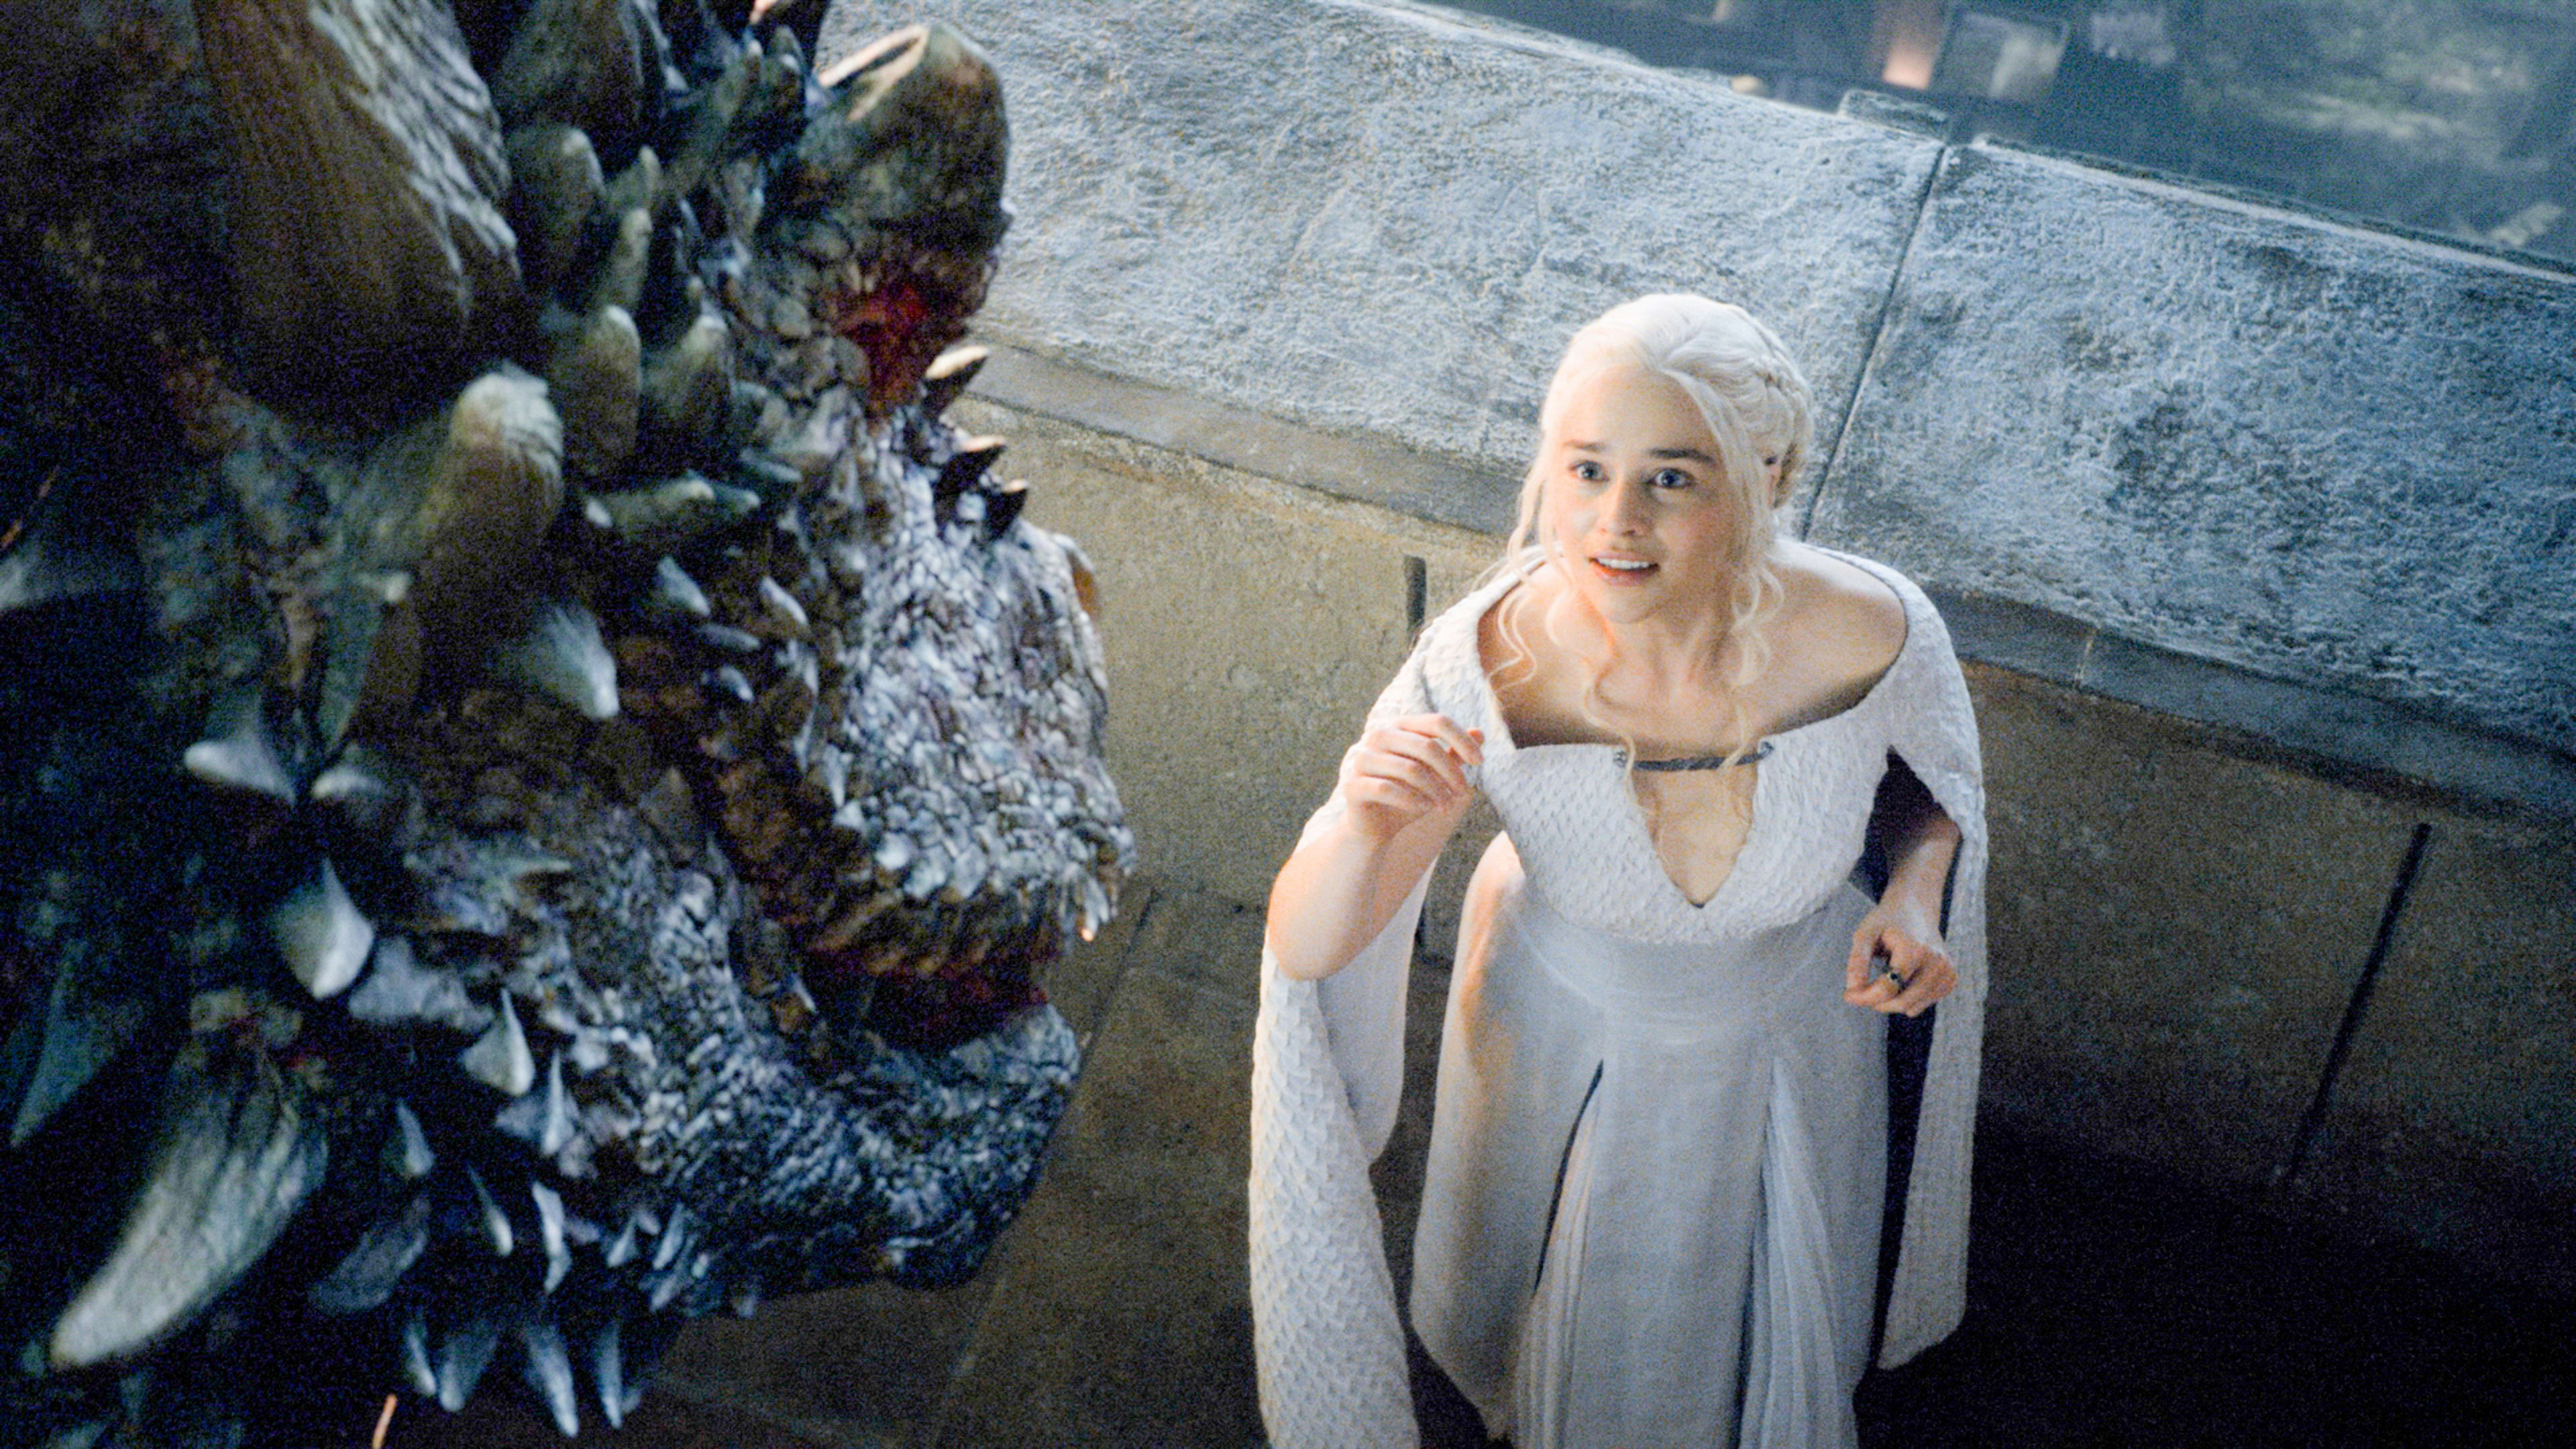 An Oral History Of How “Game Of Thrones” Went From Crazy Idea To HBO’s Biggest Hit